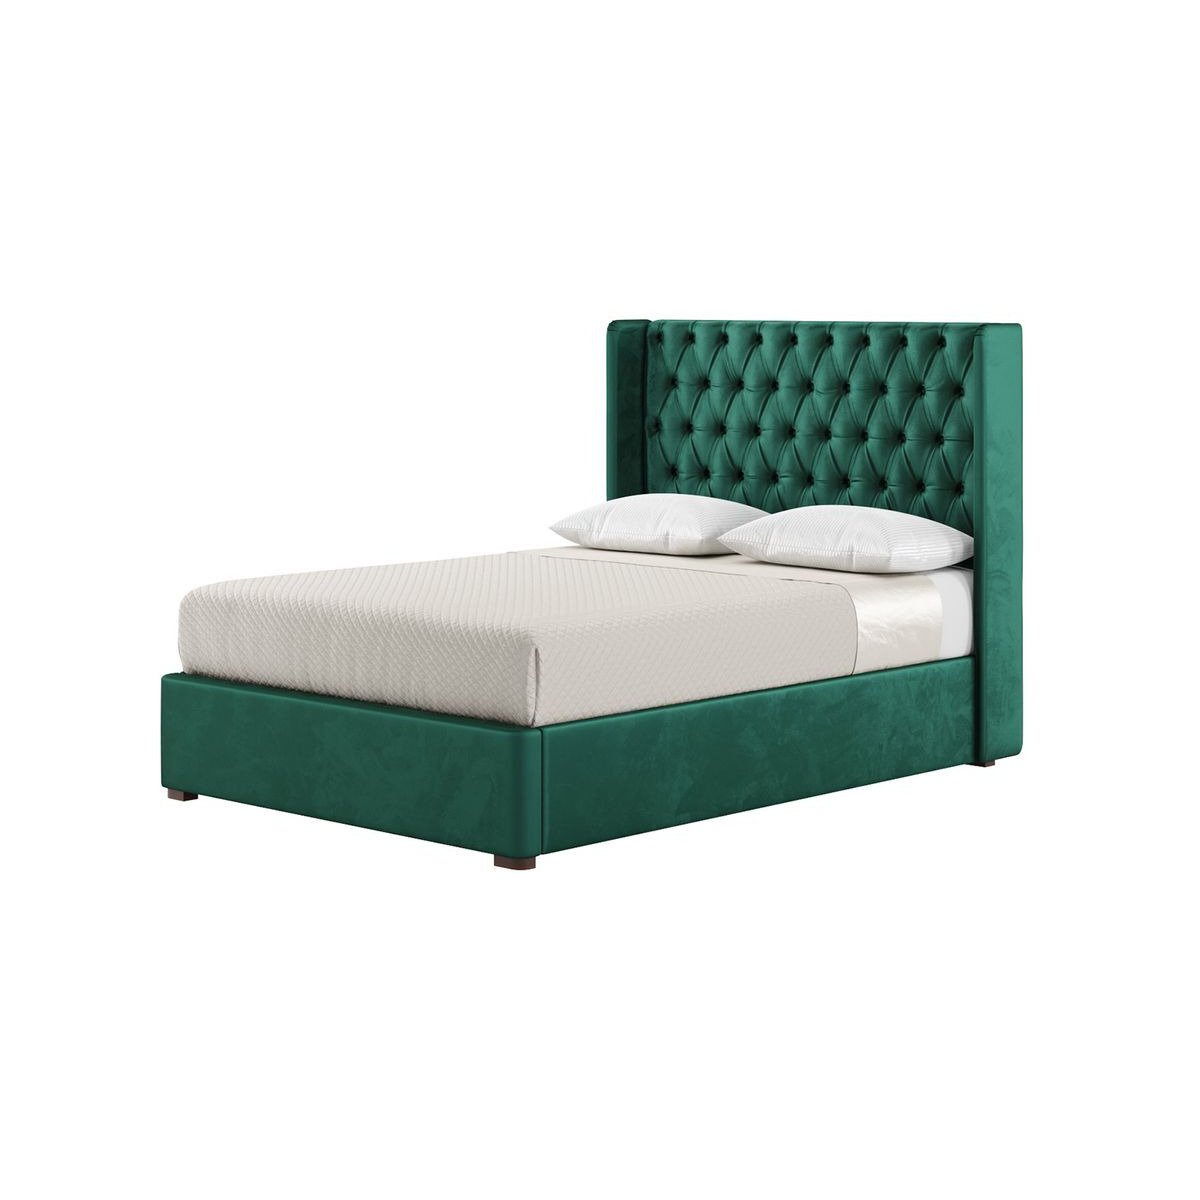 Jewel 4ft6 Double Bed Frame With Luxury Deep Button Quilted Wing Headboard, dark green, Leg colour: dark oak - image 1